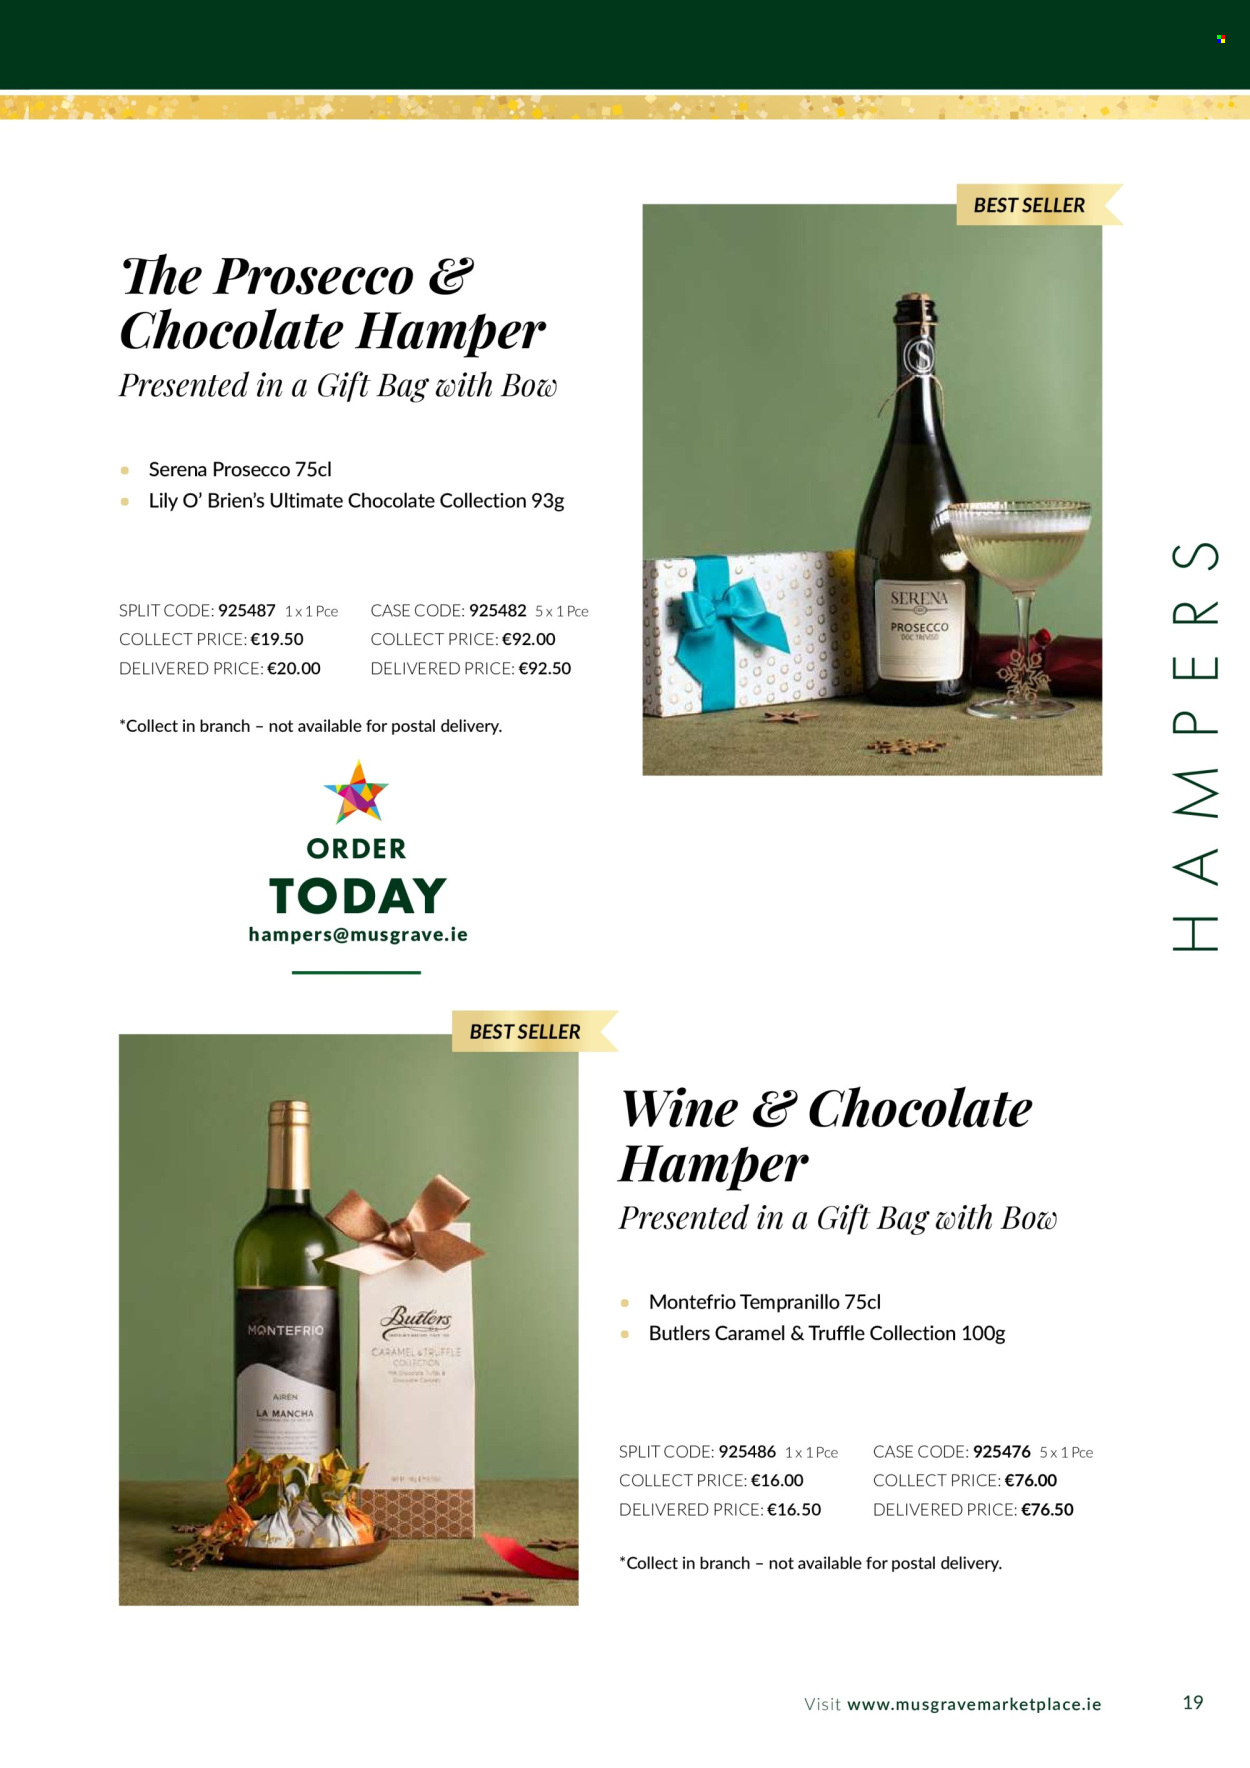 thumbnail - MUSGRAVE Market Place offer  - 19.08.2022 - 31.12.2022 - Sales products - hamper, chocolate, truffles, caramel, prosecco, wine, Tempranillo, gift bag. Page 19.